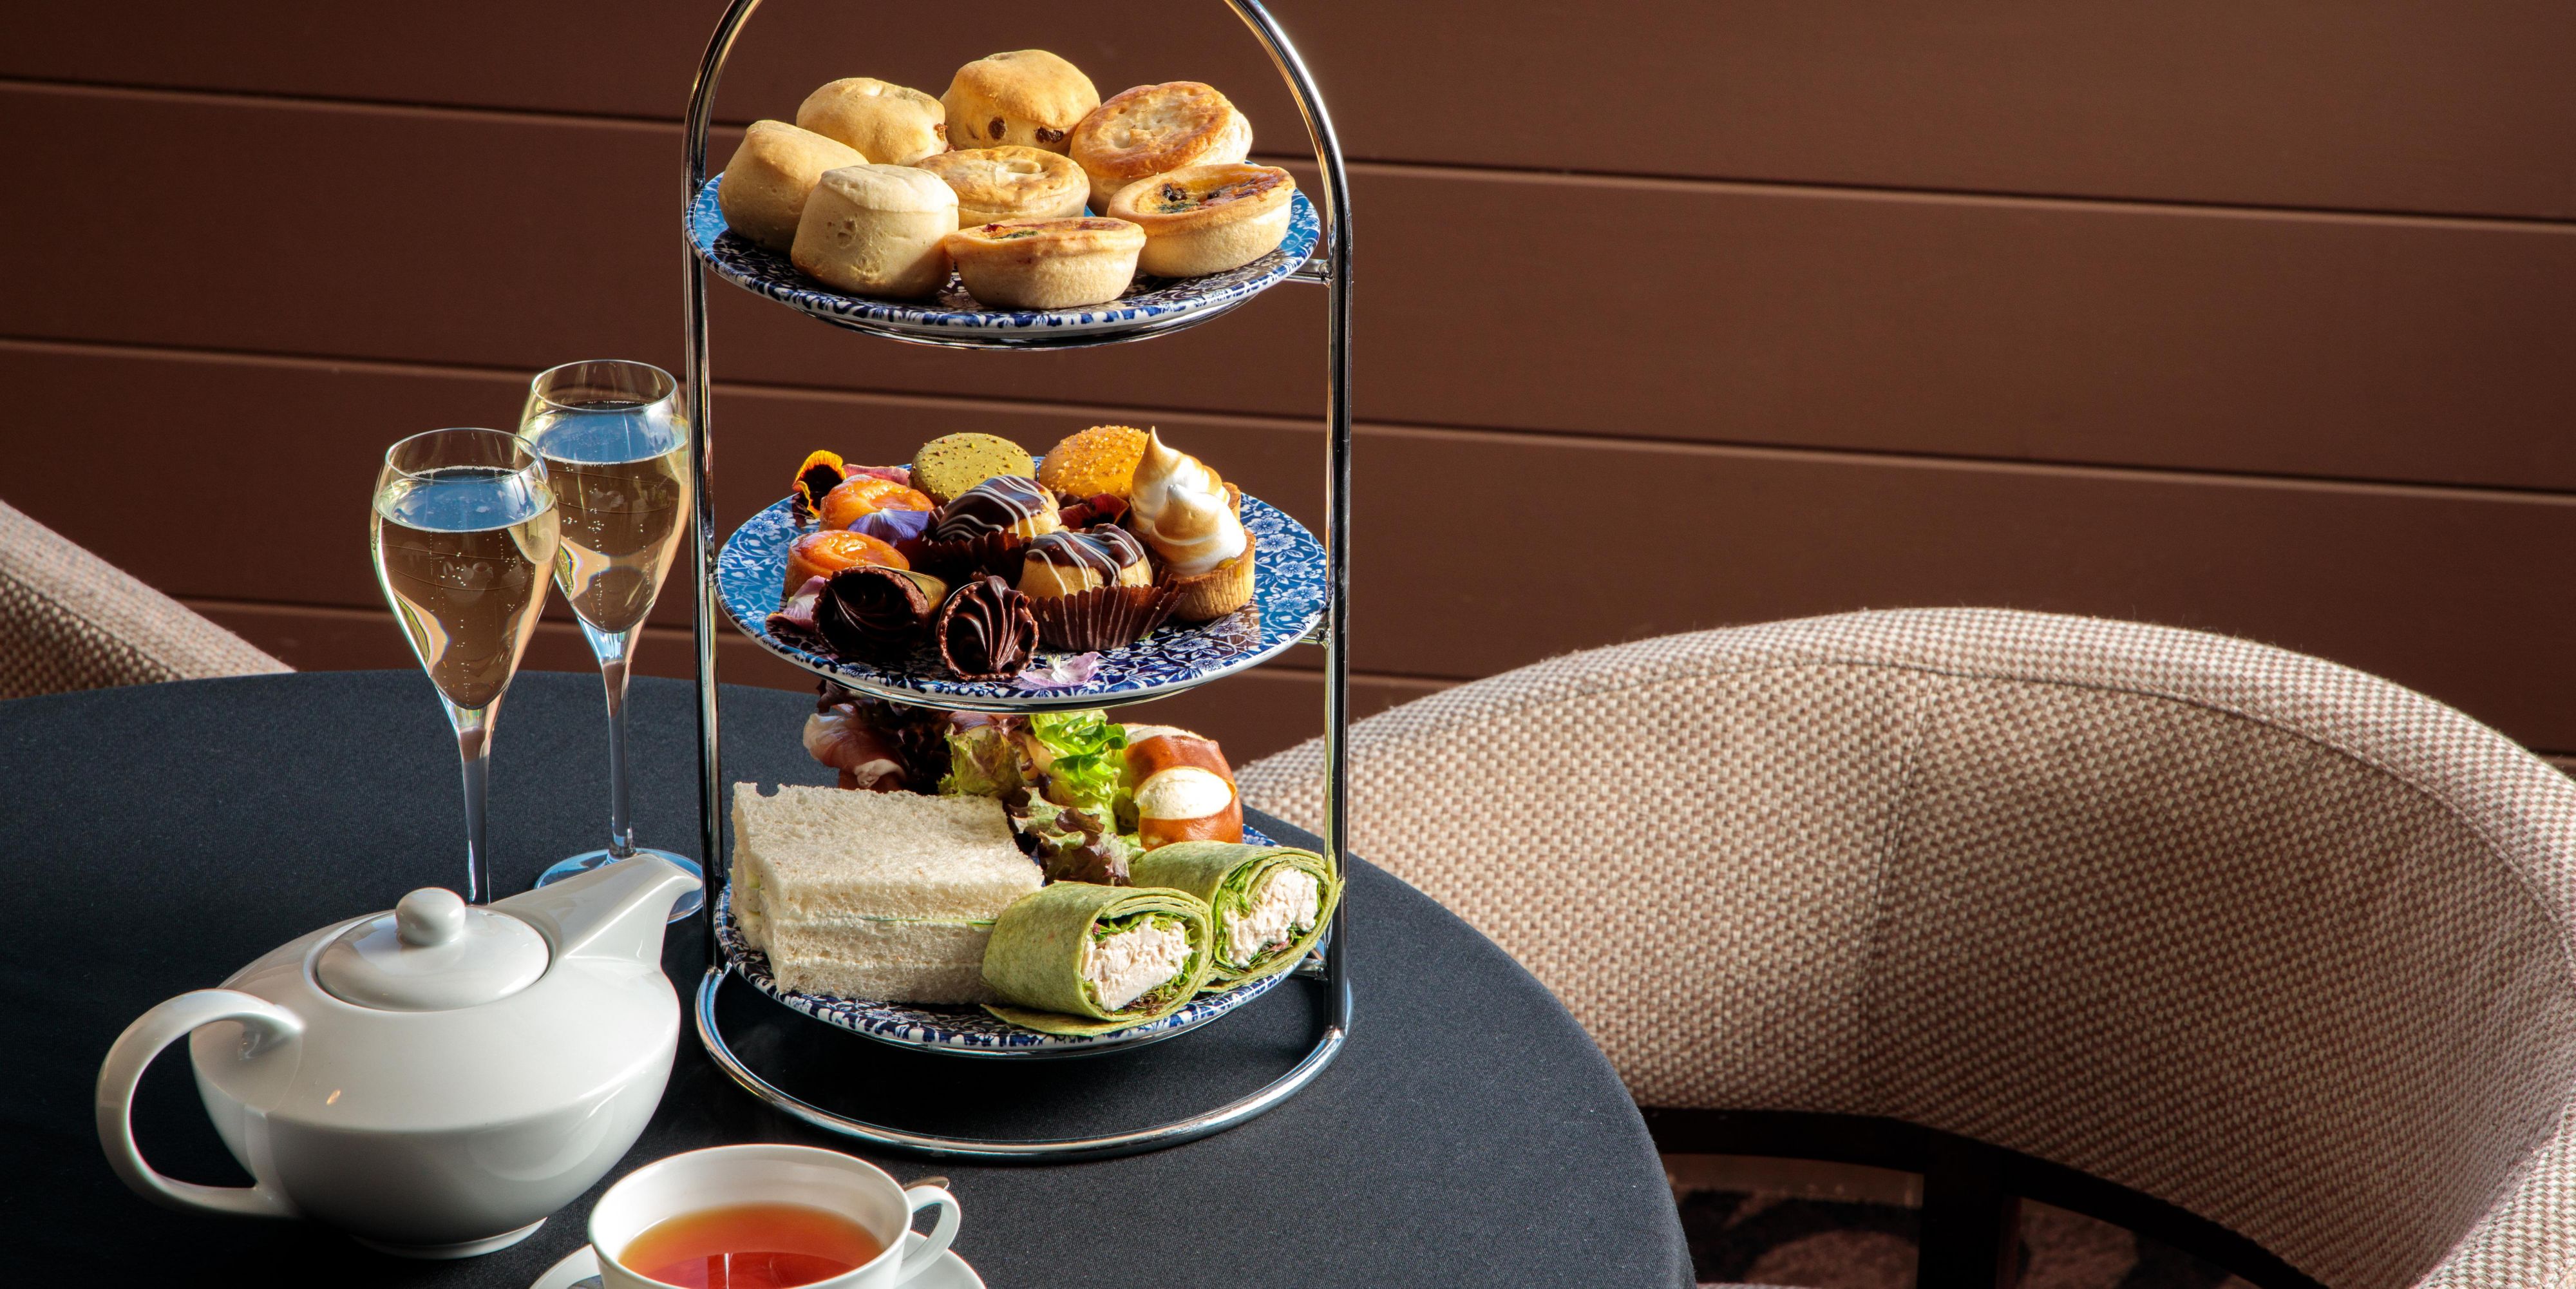 InterContinental Adelaide’s High Tea offerings are the perfect complement to an afternoon in Adelaide for any occasions. Indulge in a range of gourmet sandwiches or lunch items, hot pastries, freshly baked scones and delicious sweets.